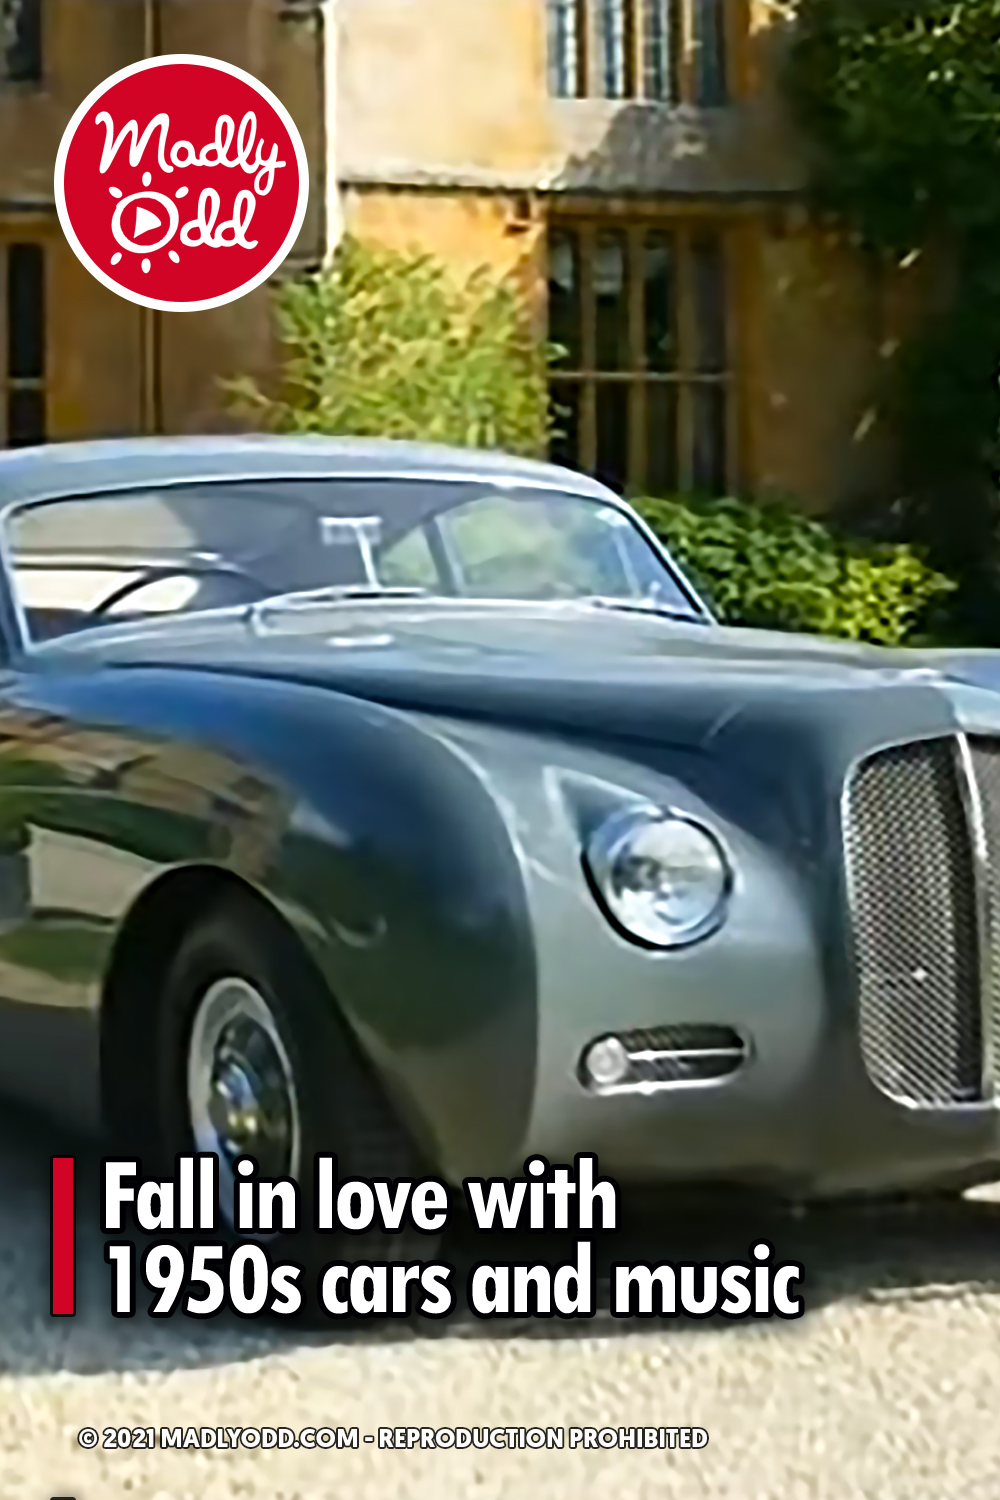 Fall in love with 1950s cars and music